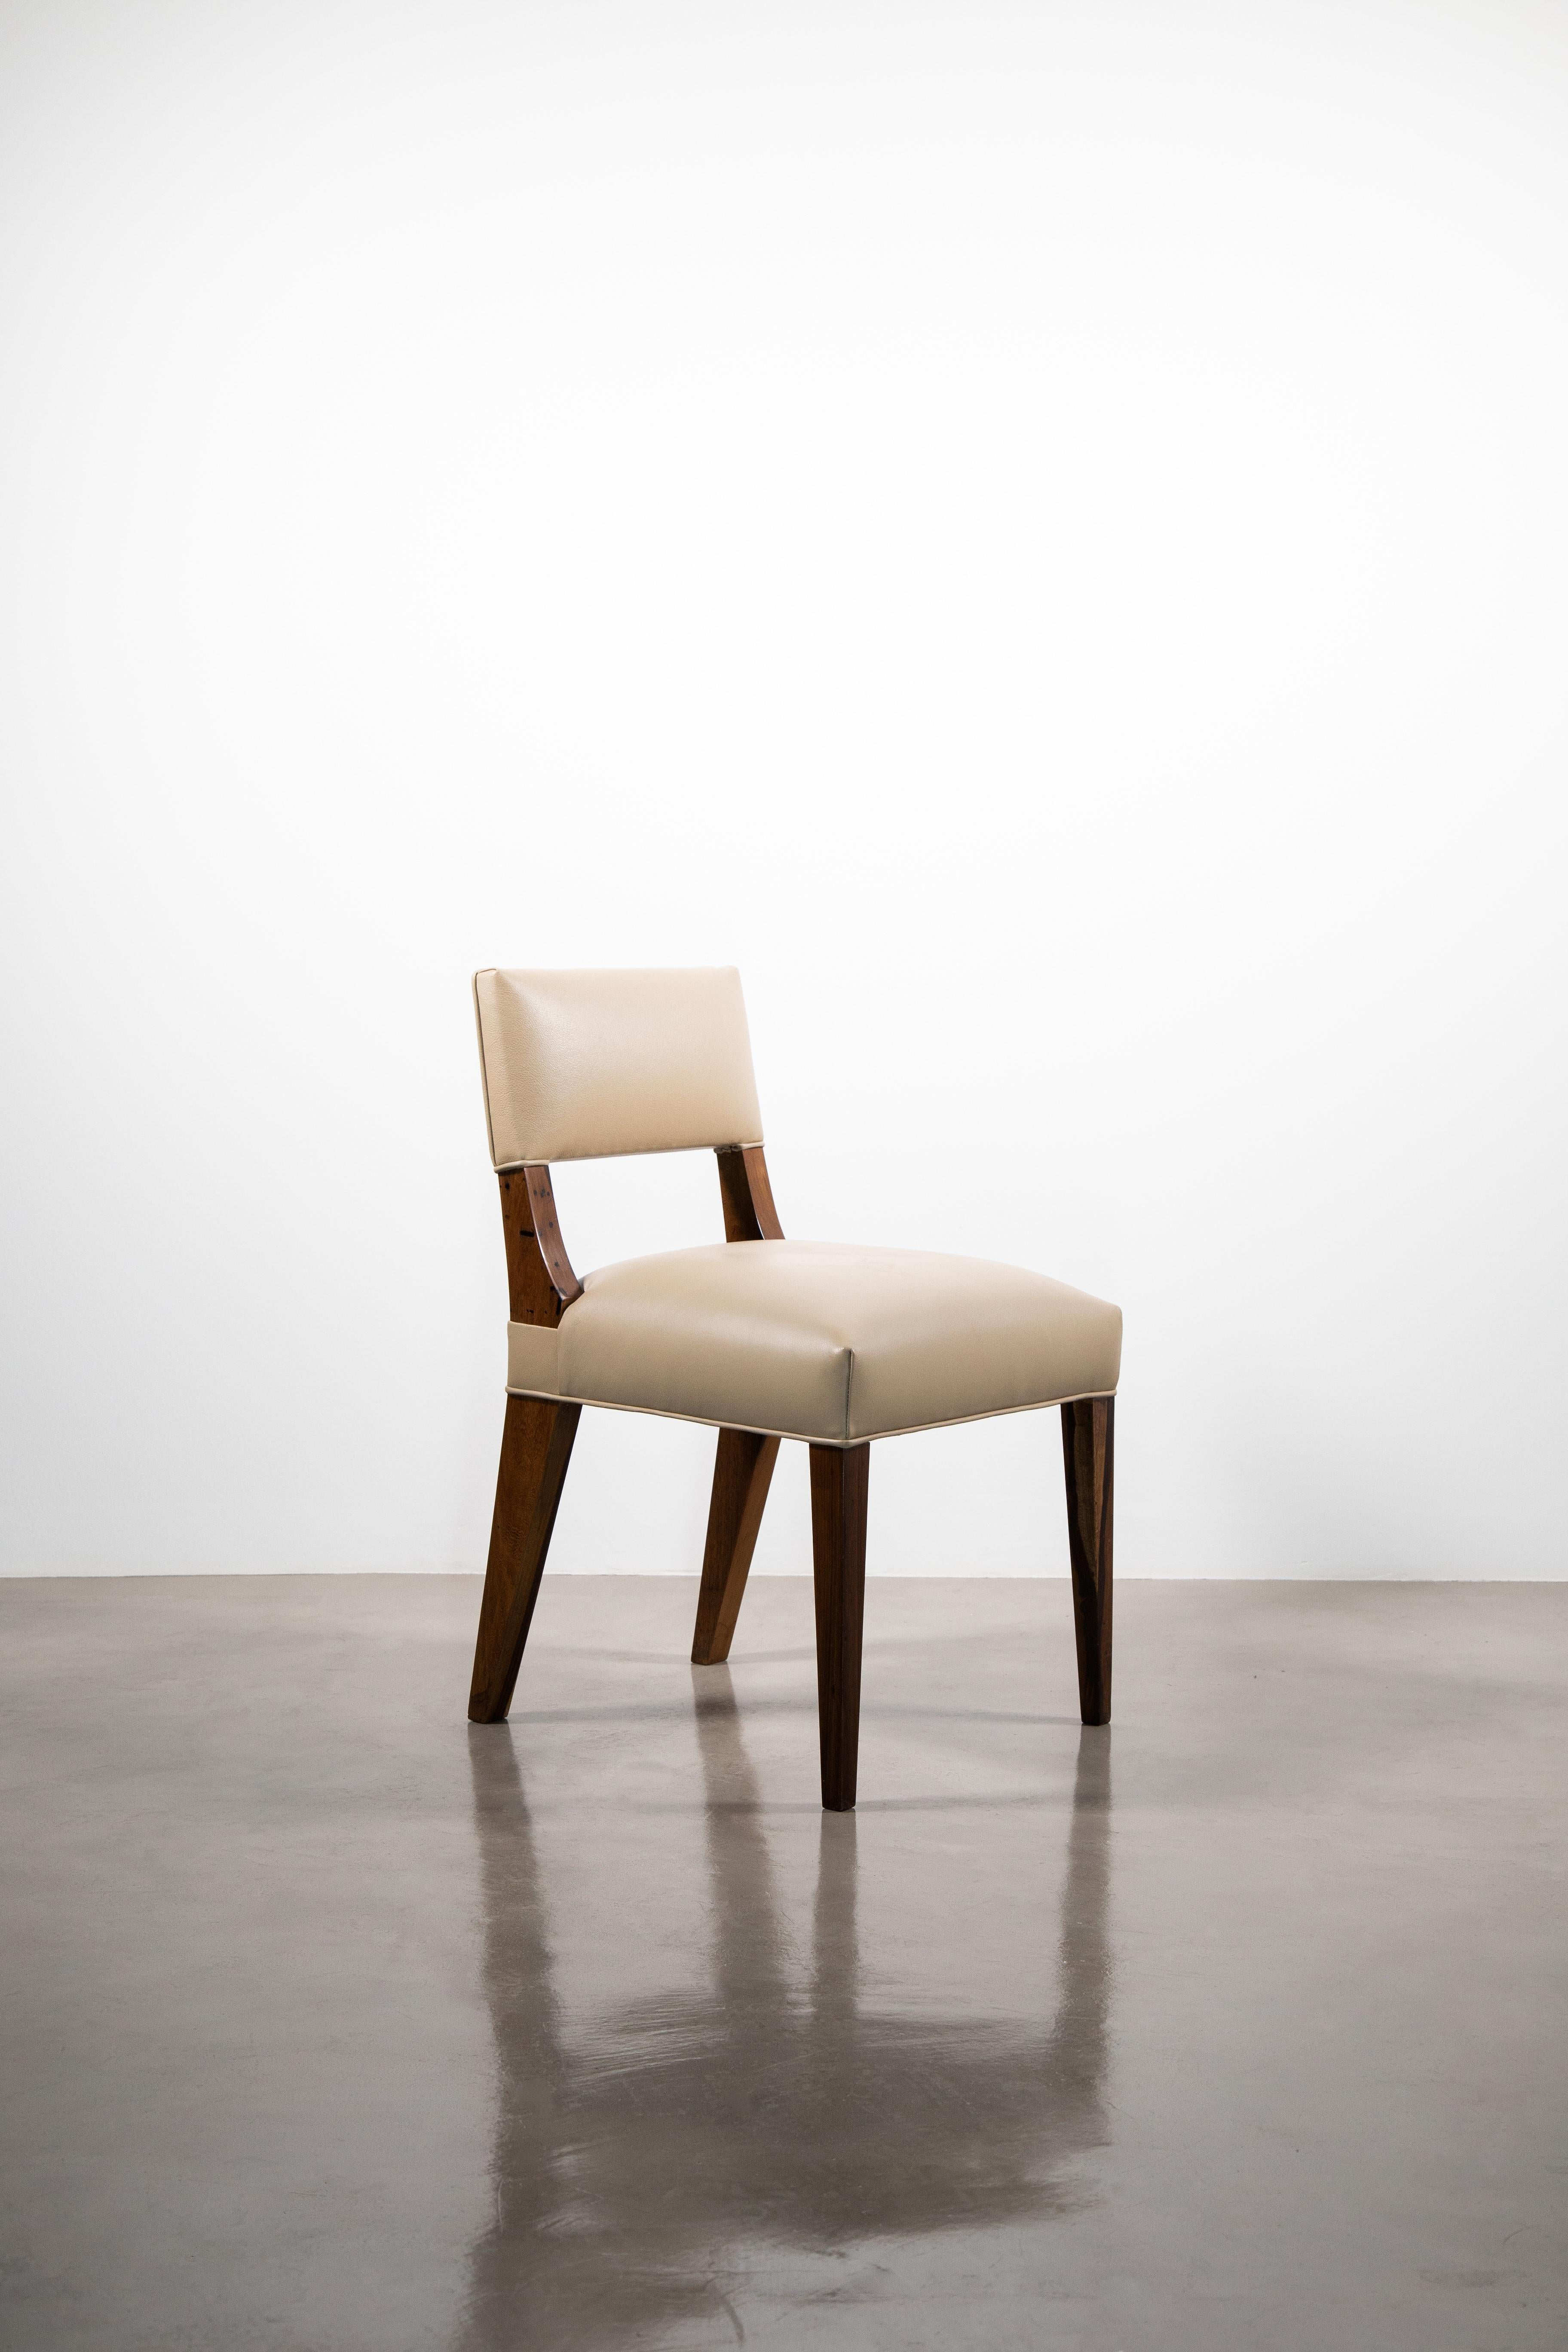 Bruno Modern dining chair in Exotic Argentine Rosewood and Leather by Costantini Design - Quick Ship

Measurements are 21